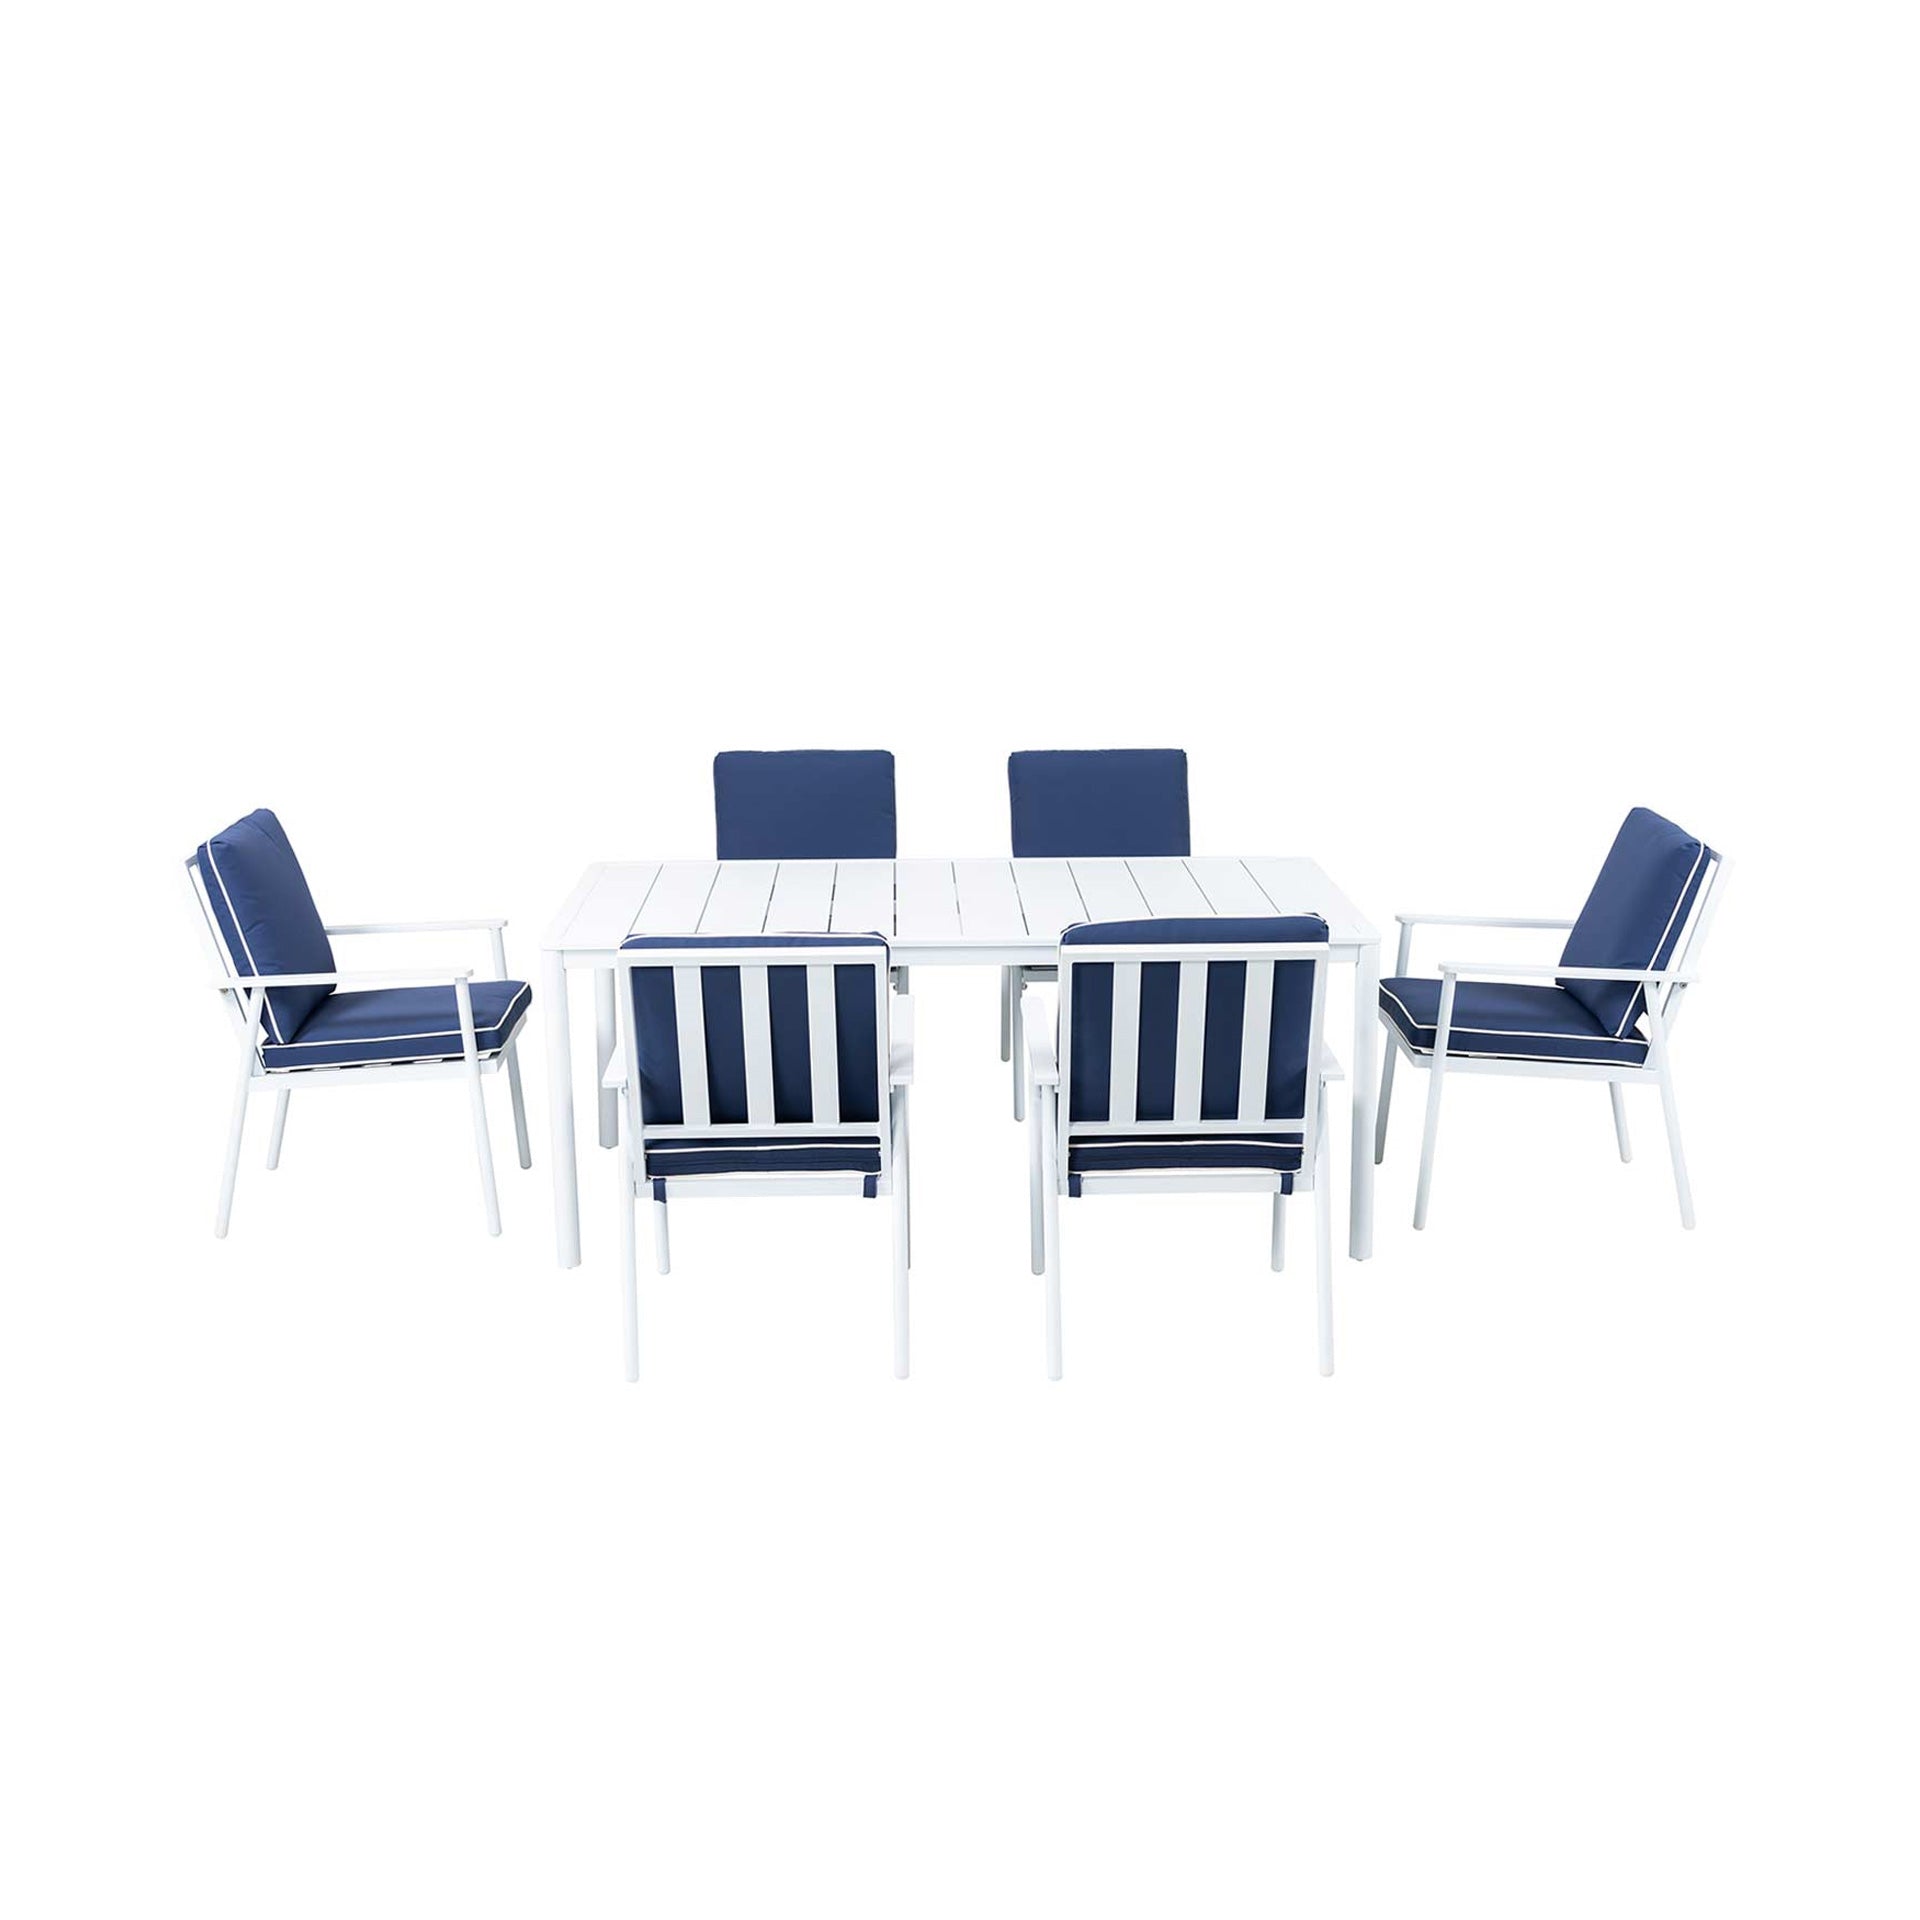 Patio Time Bluebell 7 Piece Aluminum Dining Set